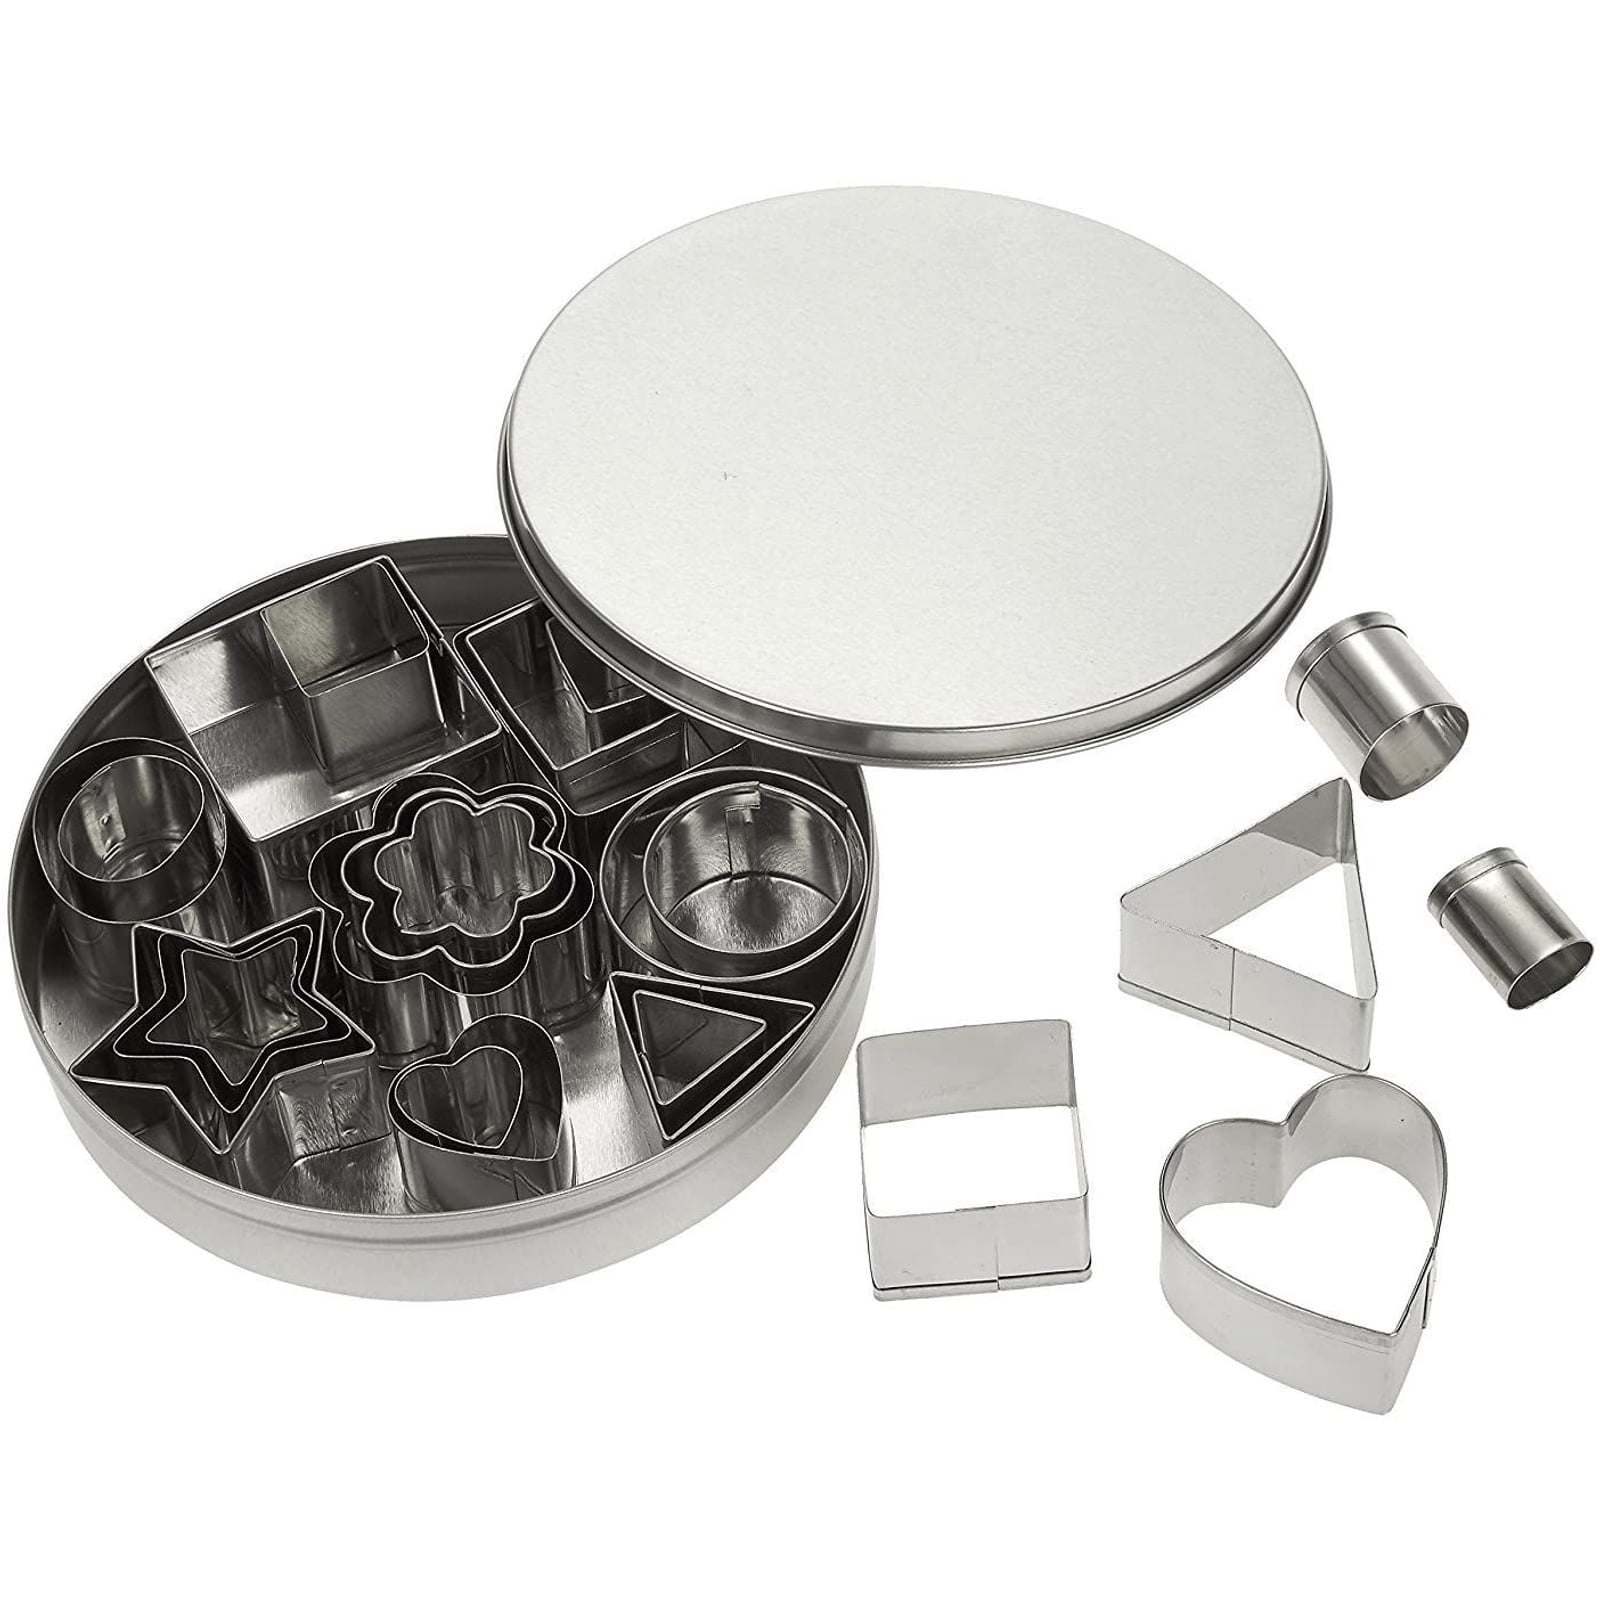 snail stainless steel cookie cutter cake baking mould biscuit diy mould A CA 